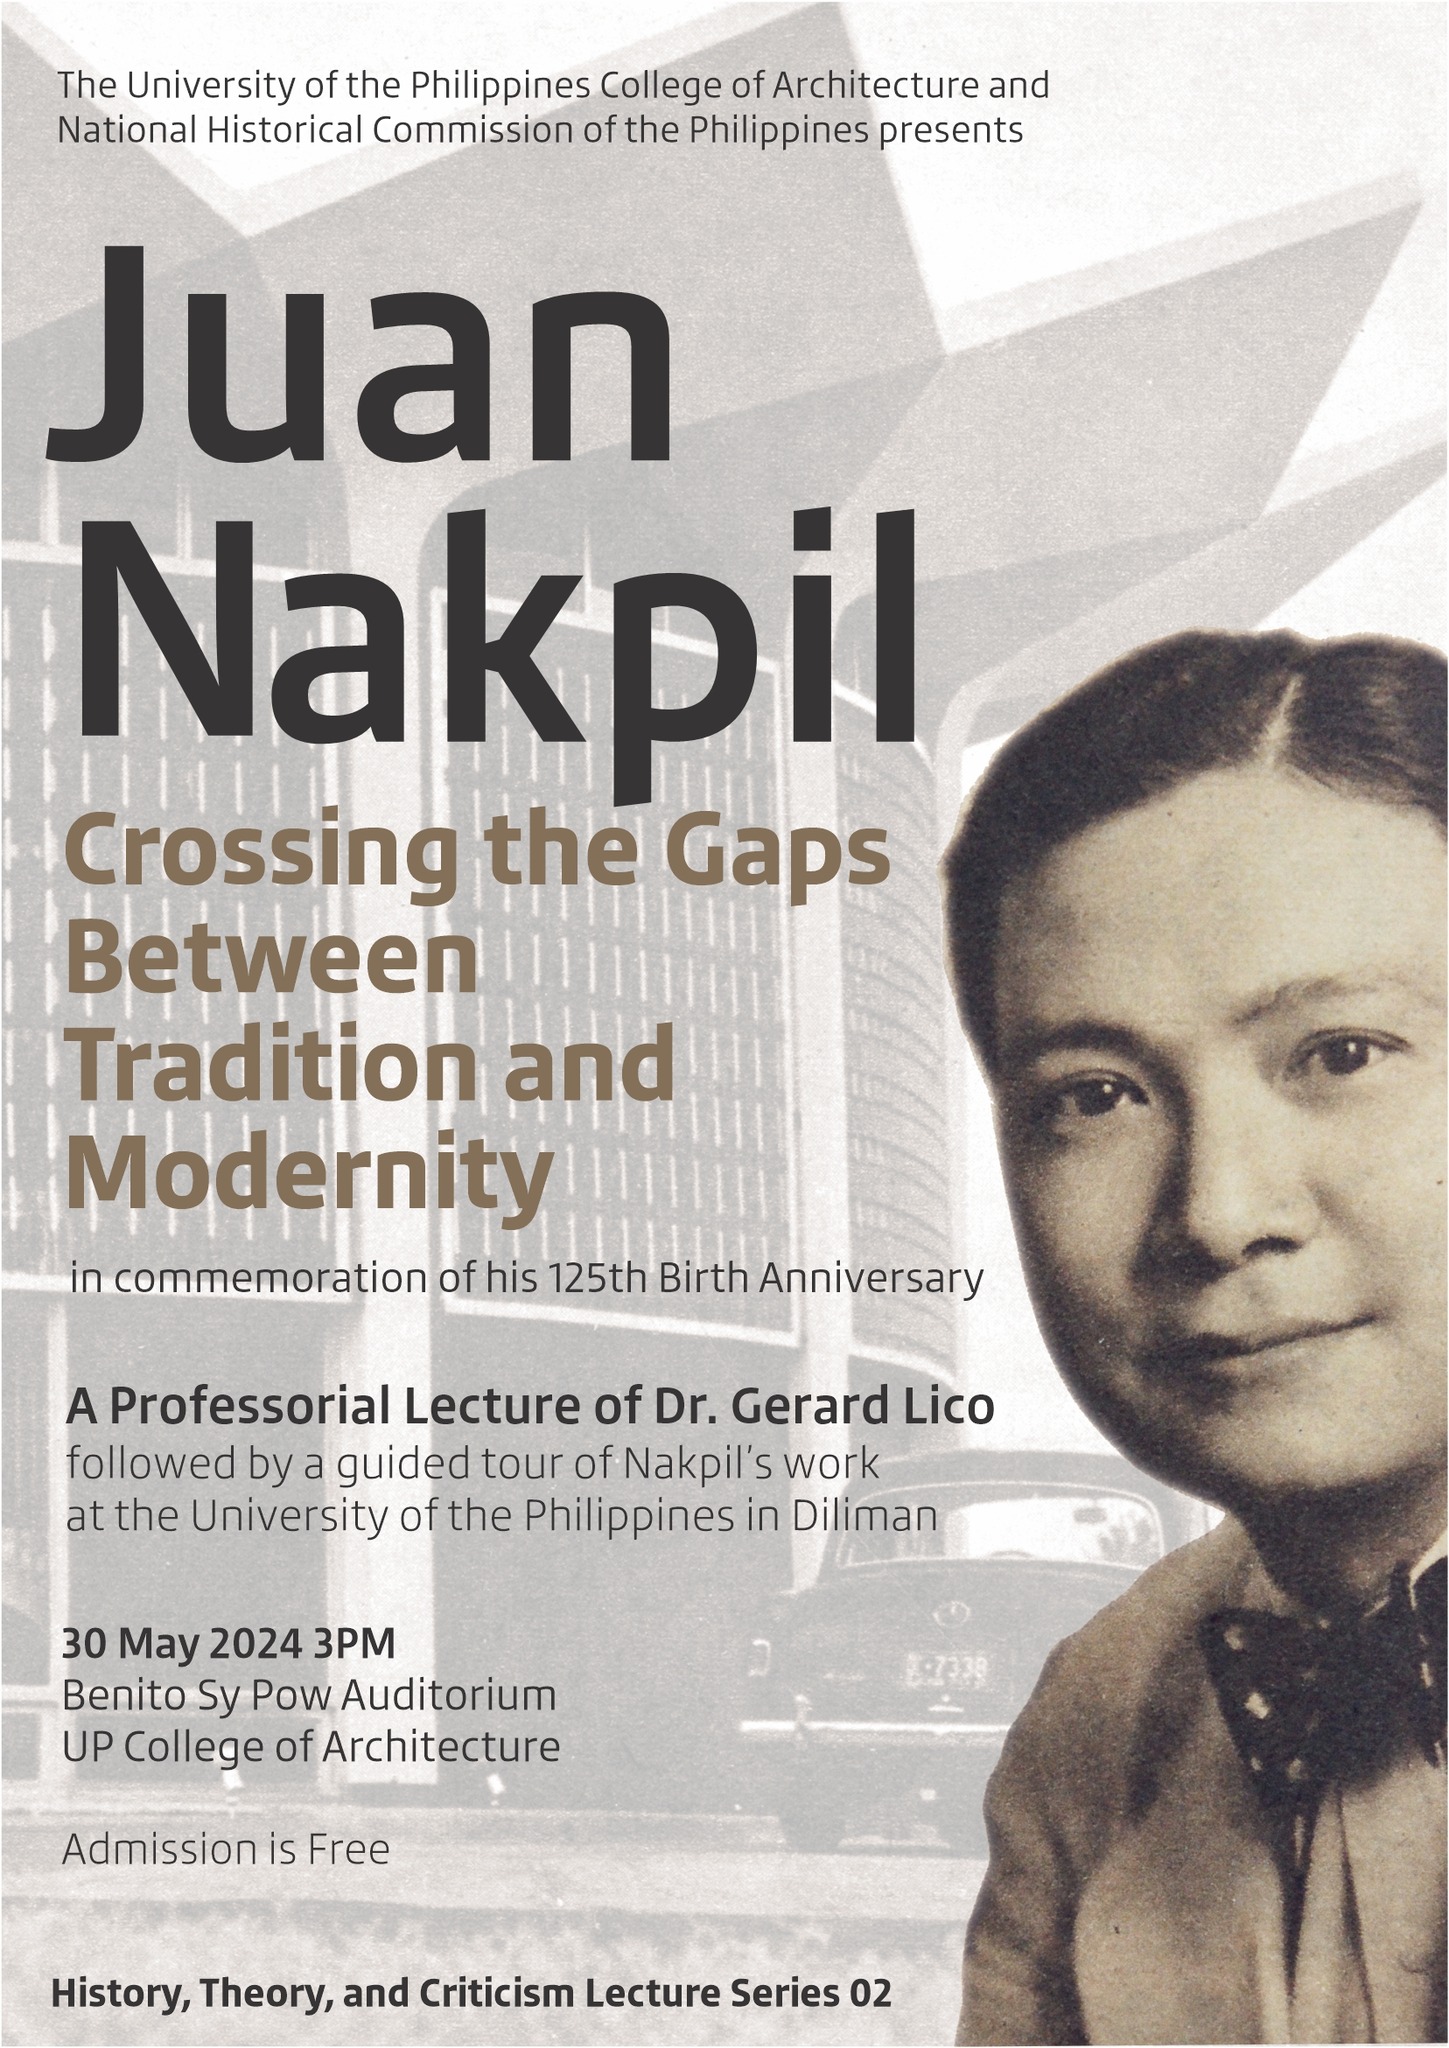 Juan Nakpil: Crossing the Gaps Between Tradition and Modernity